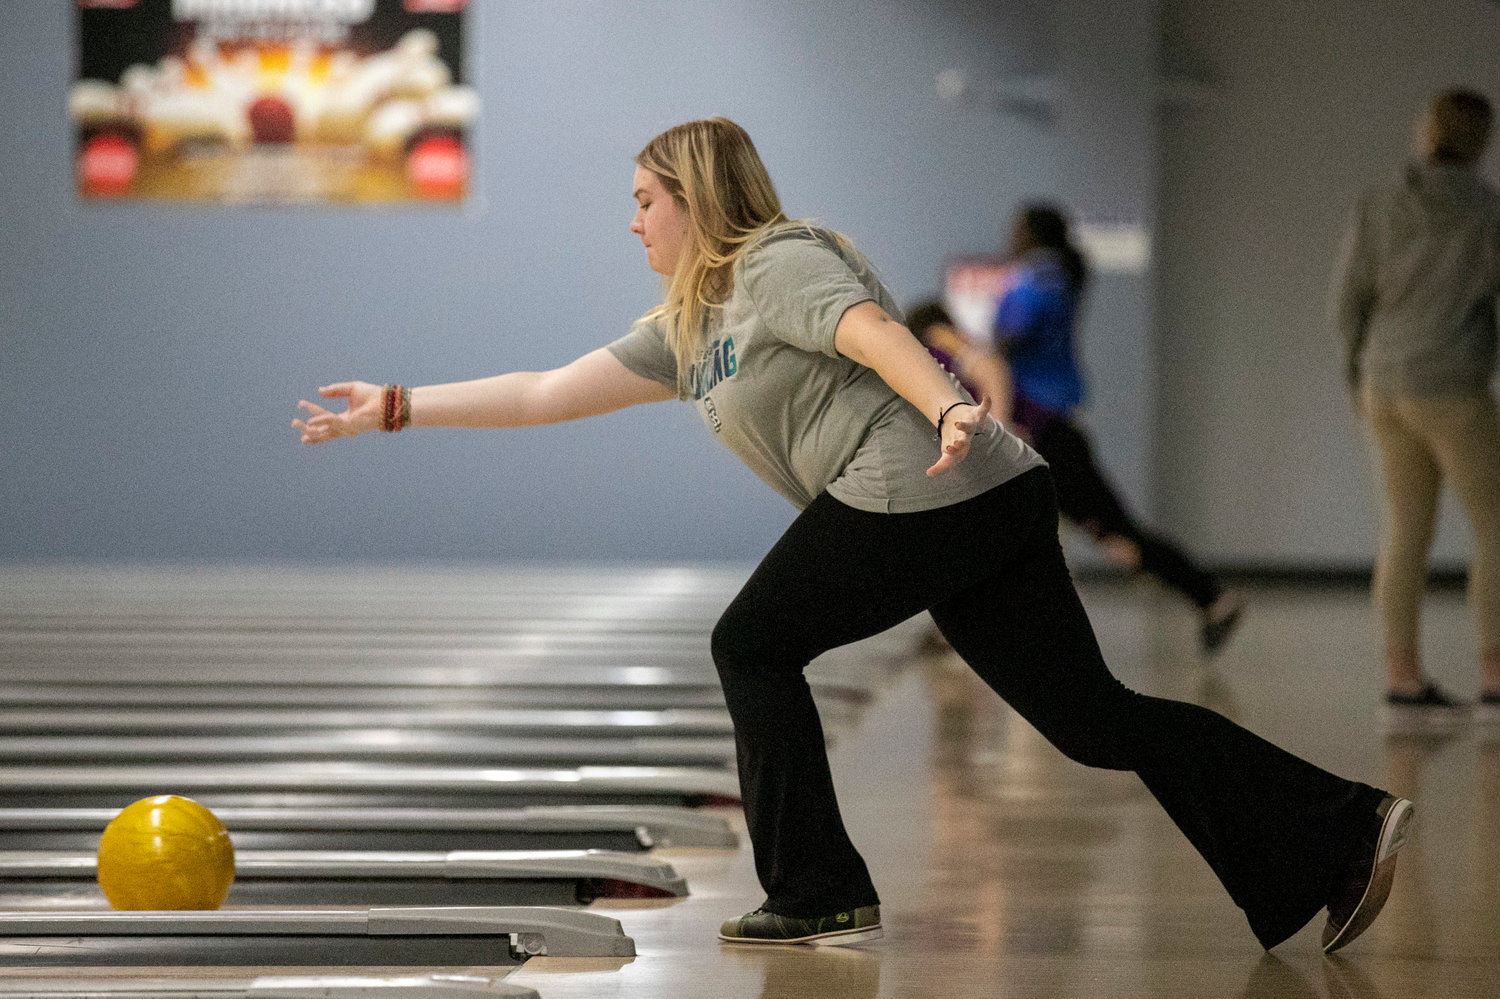 Gulf Shores’ Emily Hinson competes during Thursday’s qualifying round of the South Regional bowling championships at Eastern Shore Lanes in Spanish Fort Thursday, Jan. 19. She helped the Dolphins earn the second seed heading into tomorrow’s single-elimination bracket.